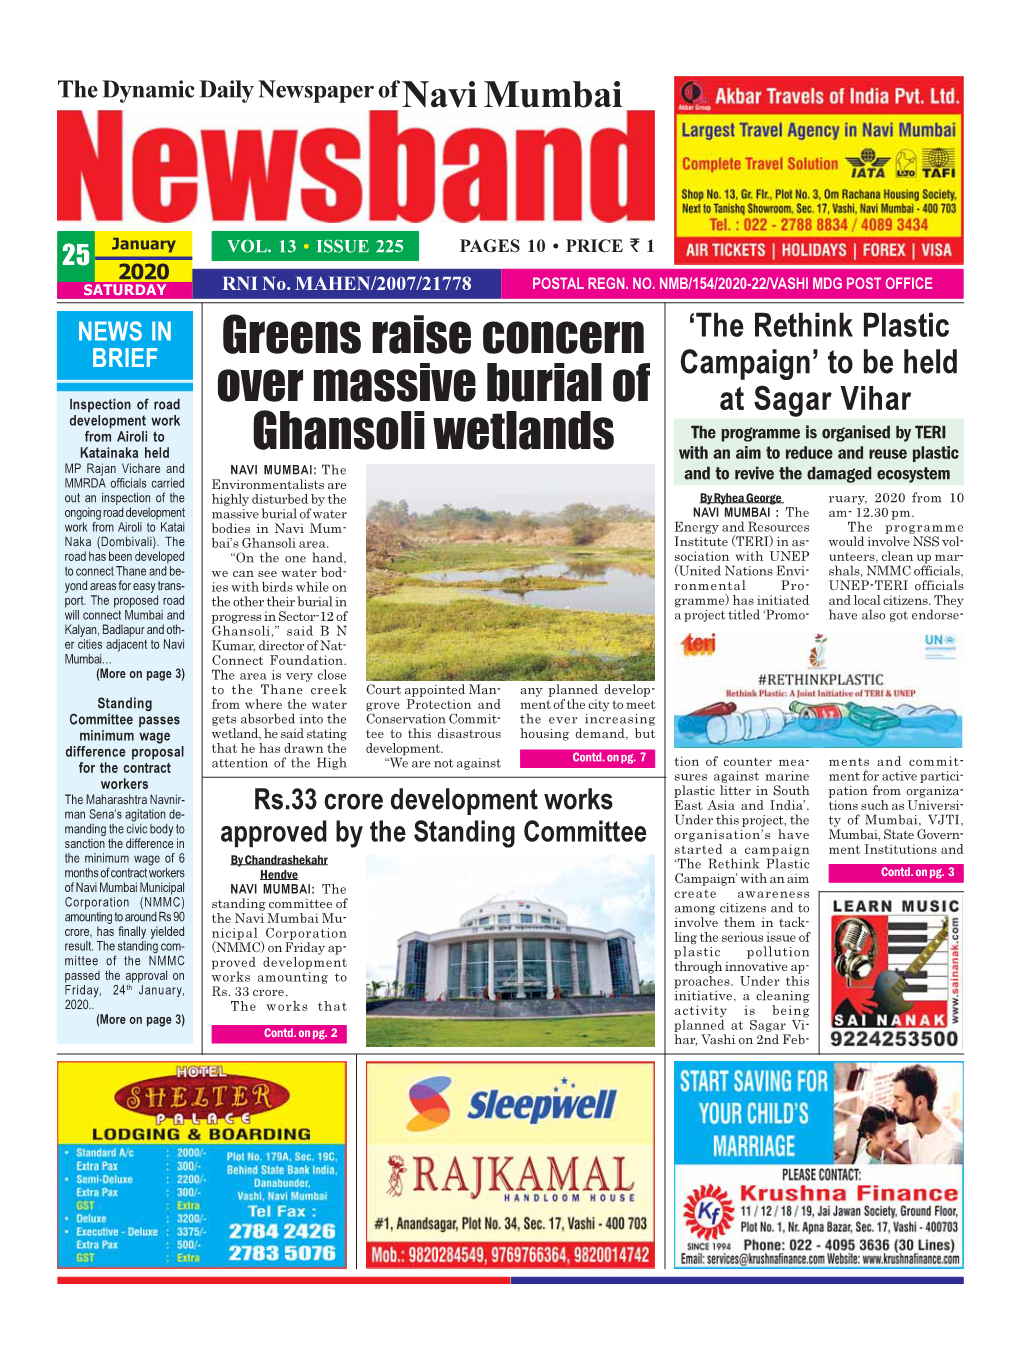 Greens Raise Concern Over Massive Burial of Ghansoli Wetlands